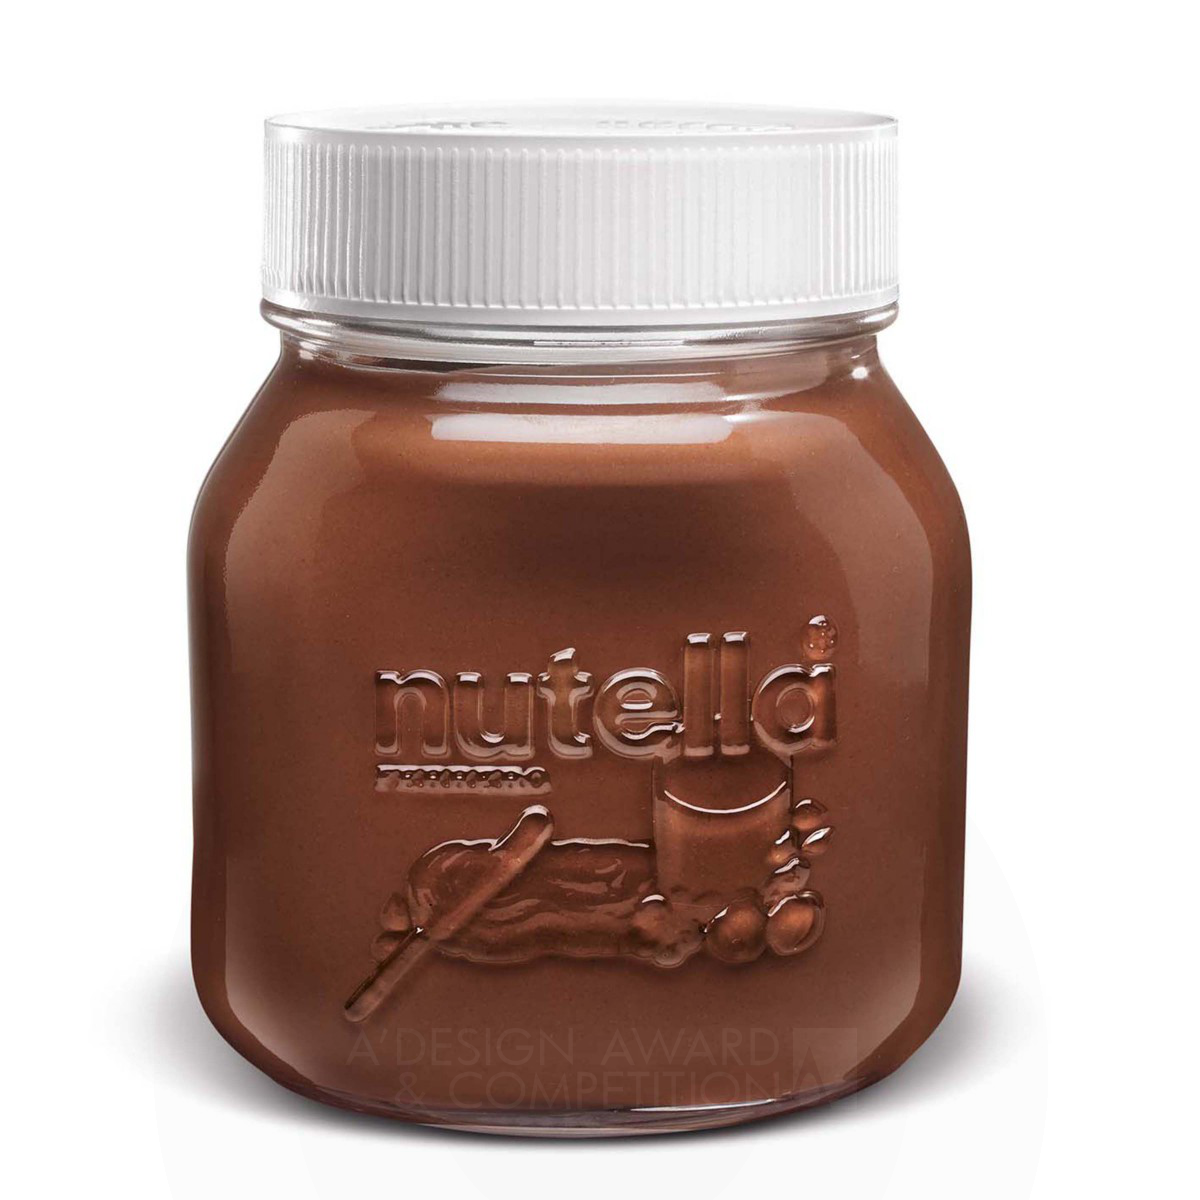 Embossed Nutella Jar for spreadable cream by MrSmith Studio